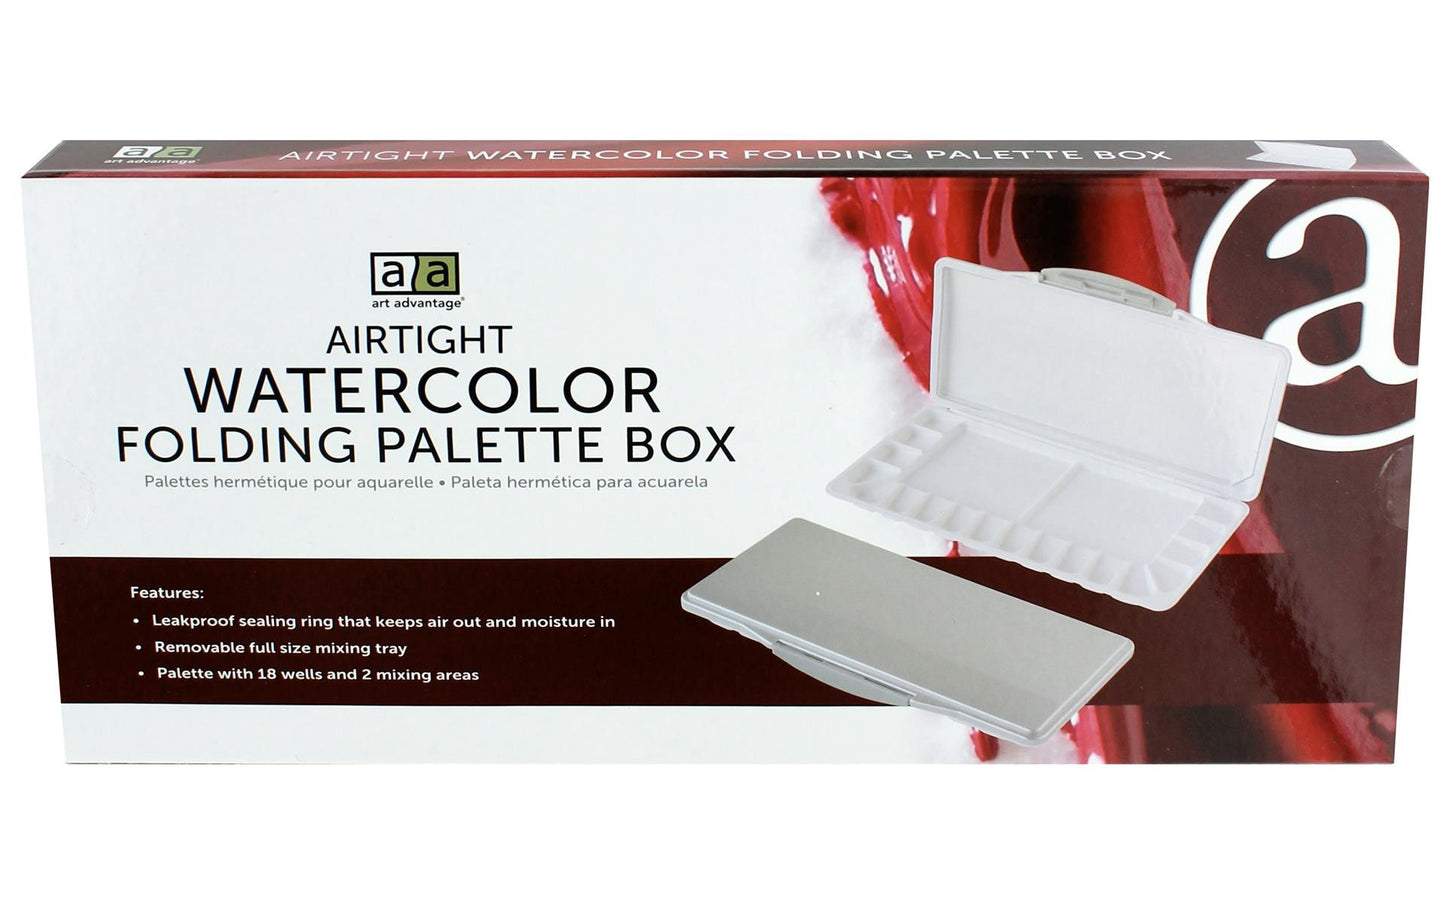 Airtight Watercolor Folding Palette: 18well + 2mix